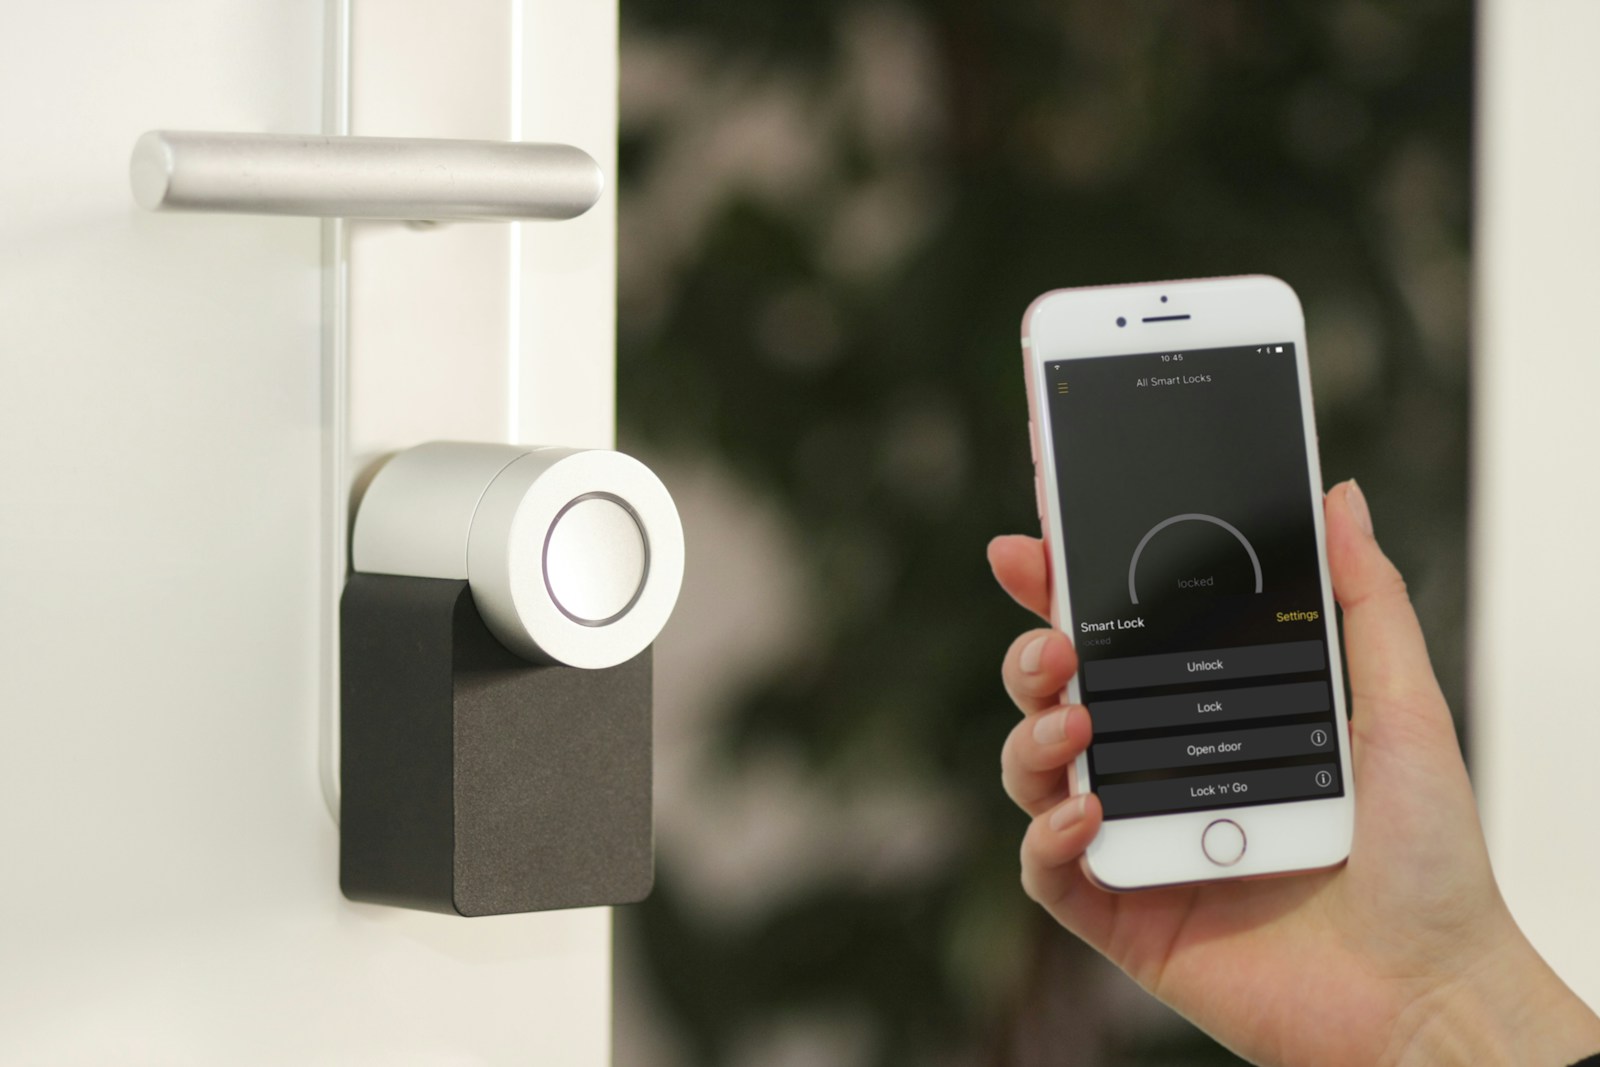 gold Apple iPhone smartphone home security system held at the door